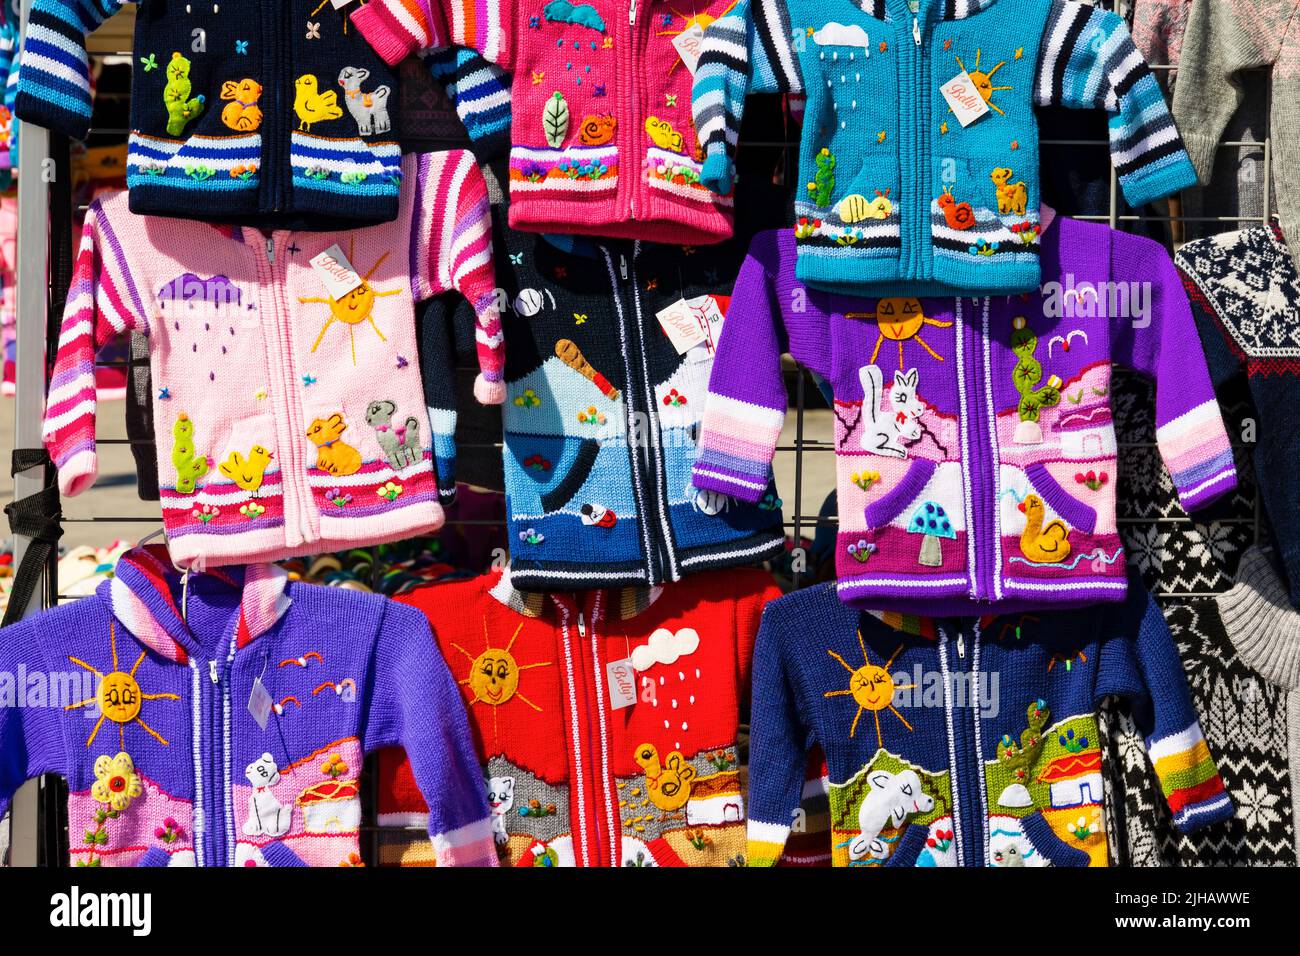 Colourful, hand knitted childrens traditional Norwegian jumpers jackets on a market stall. Skagenkaien, Stavanger, Norway Stock Photo